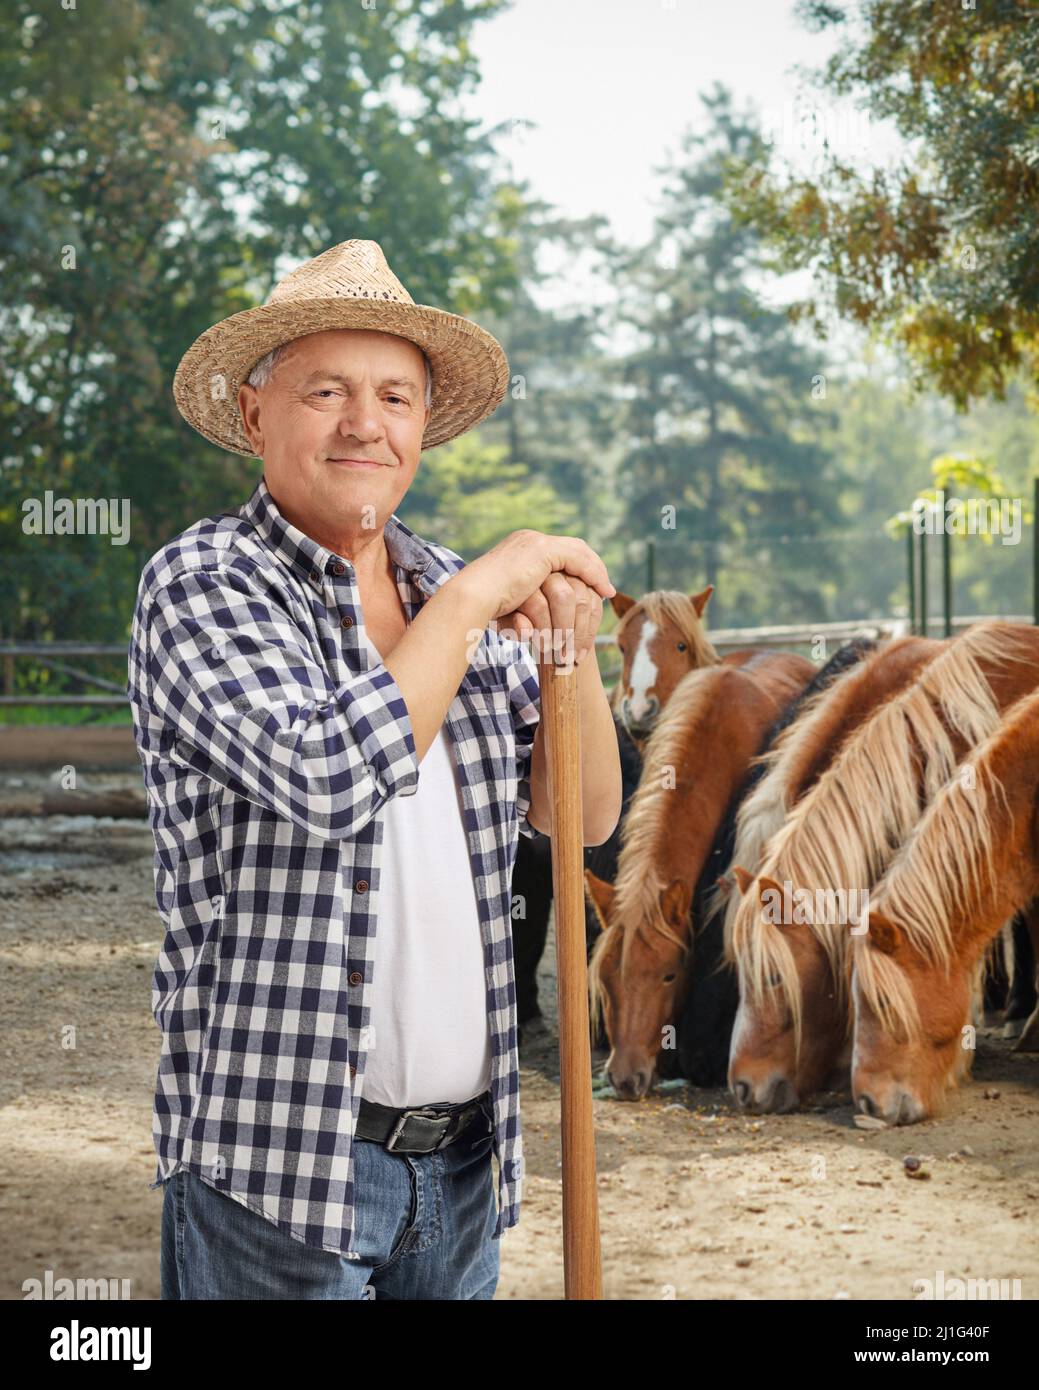 Mature farmer with a shovel posing with horses in the back Stock Photo